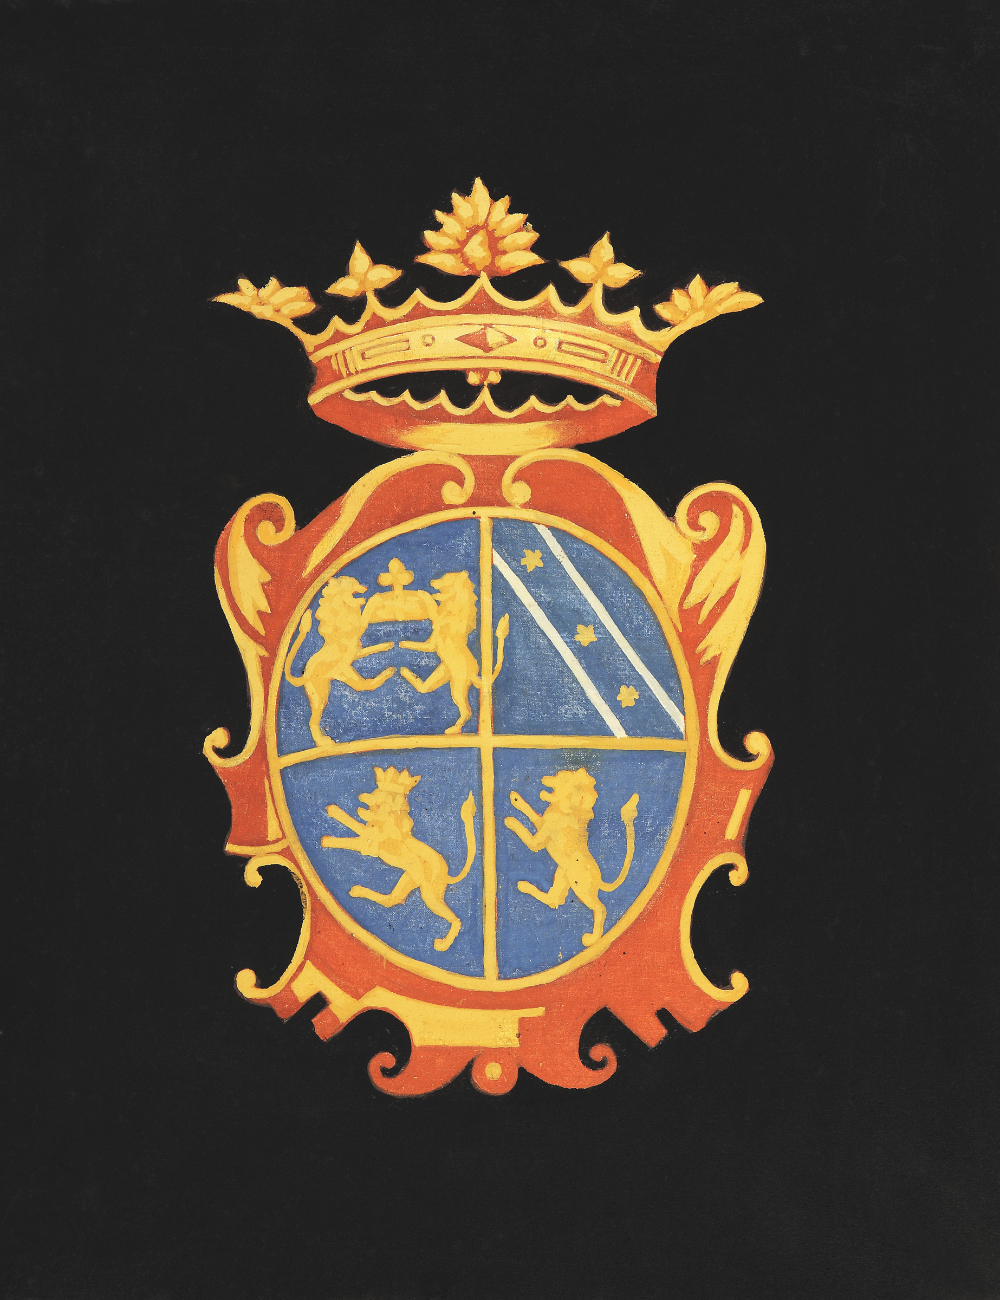 thumbnail of The Imperato Family Coat of Arms. medium: acrylic on canvas coated with varnish. date: 1968. dimensions: 44.8 x 36.2 cm